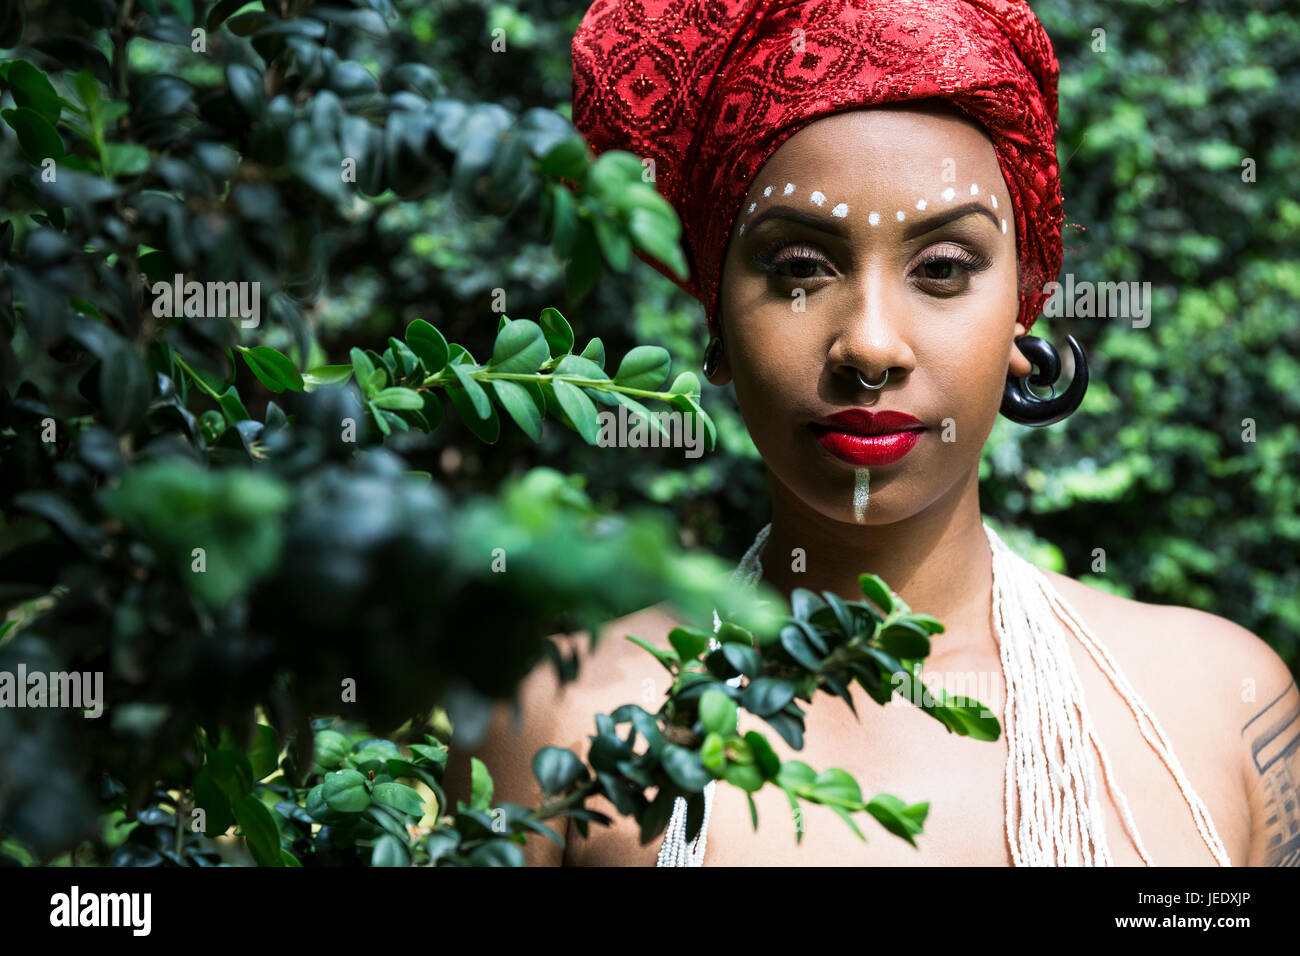 Portrait of young woman with piercings wearing traditional Brazilian headgear Stock Photo